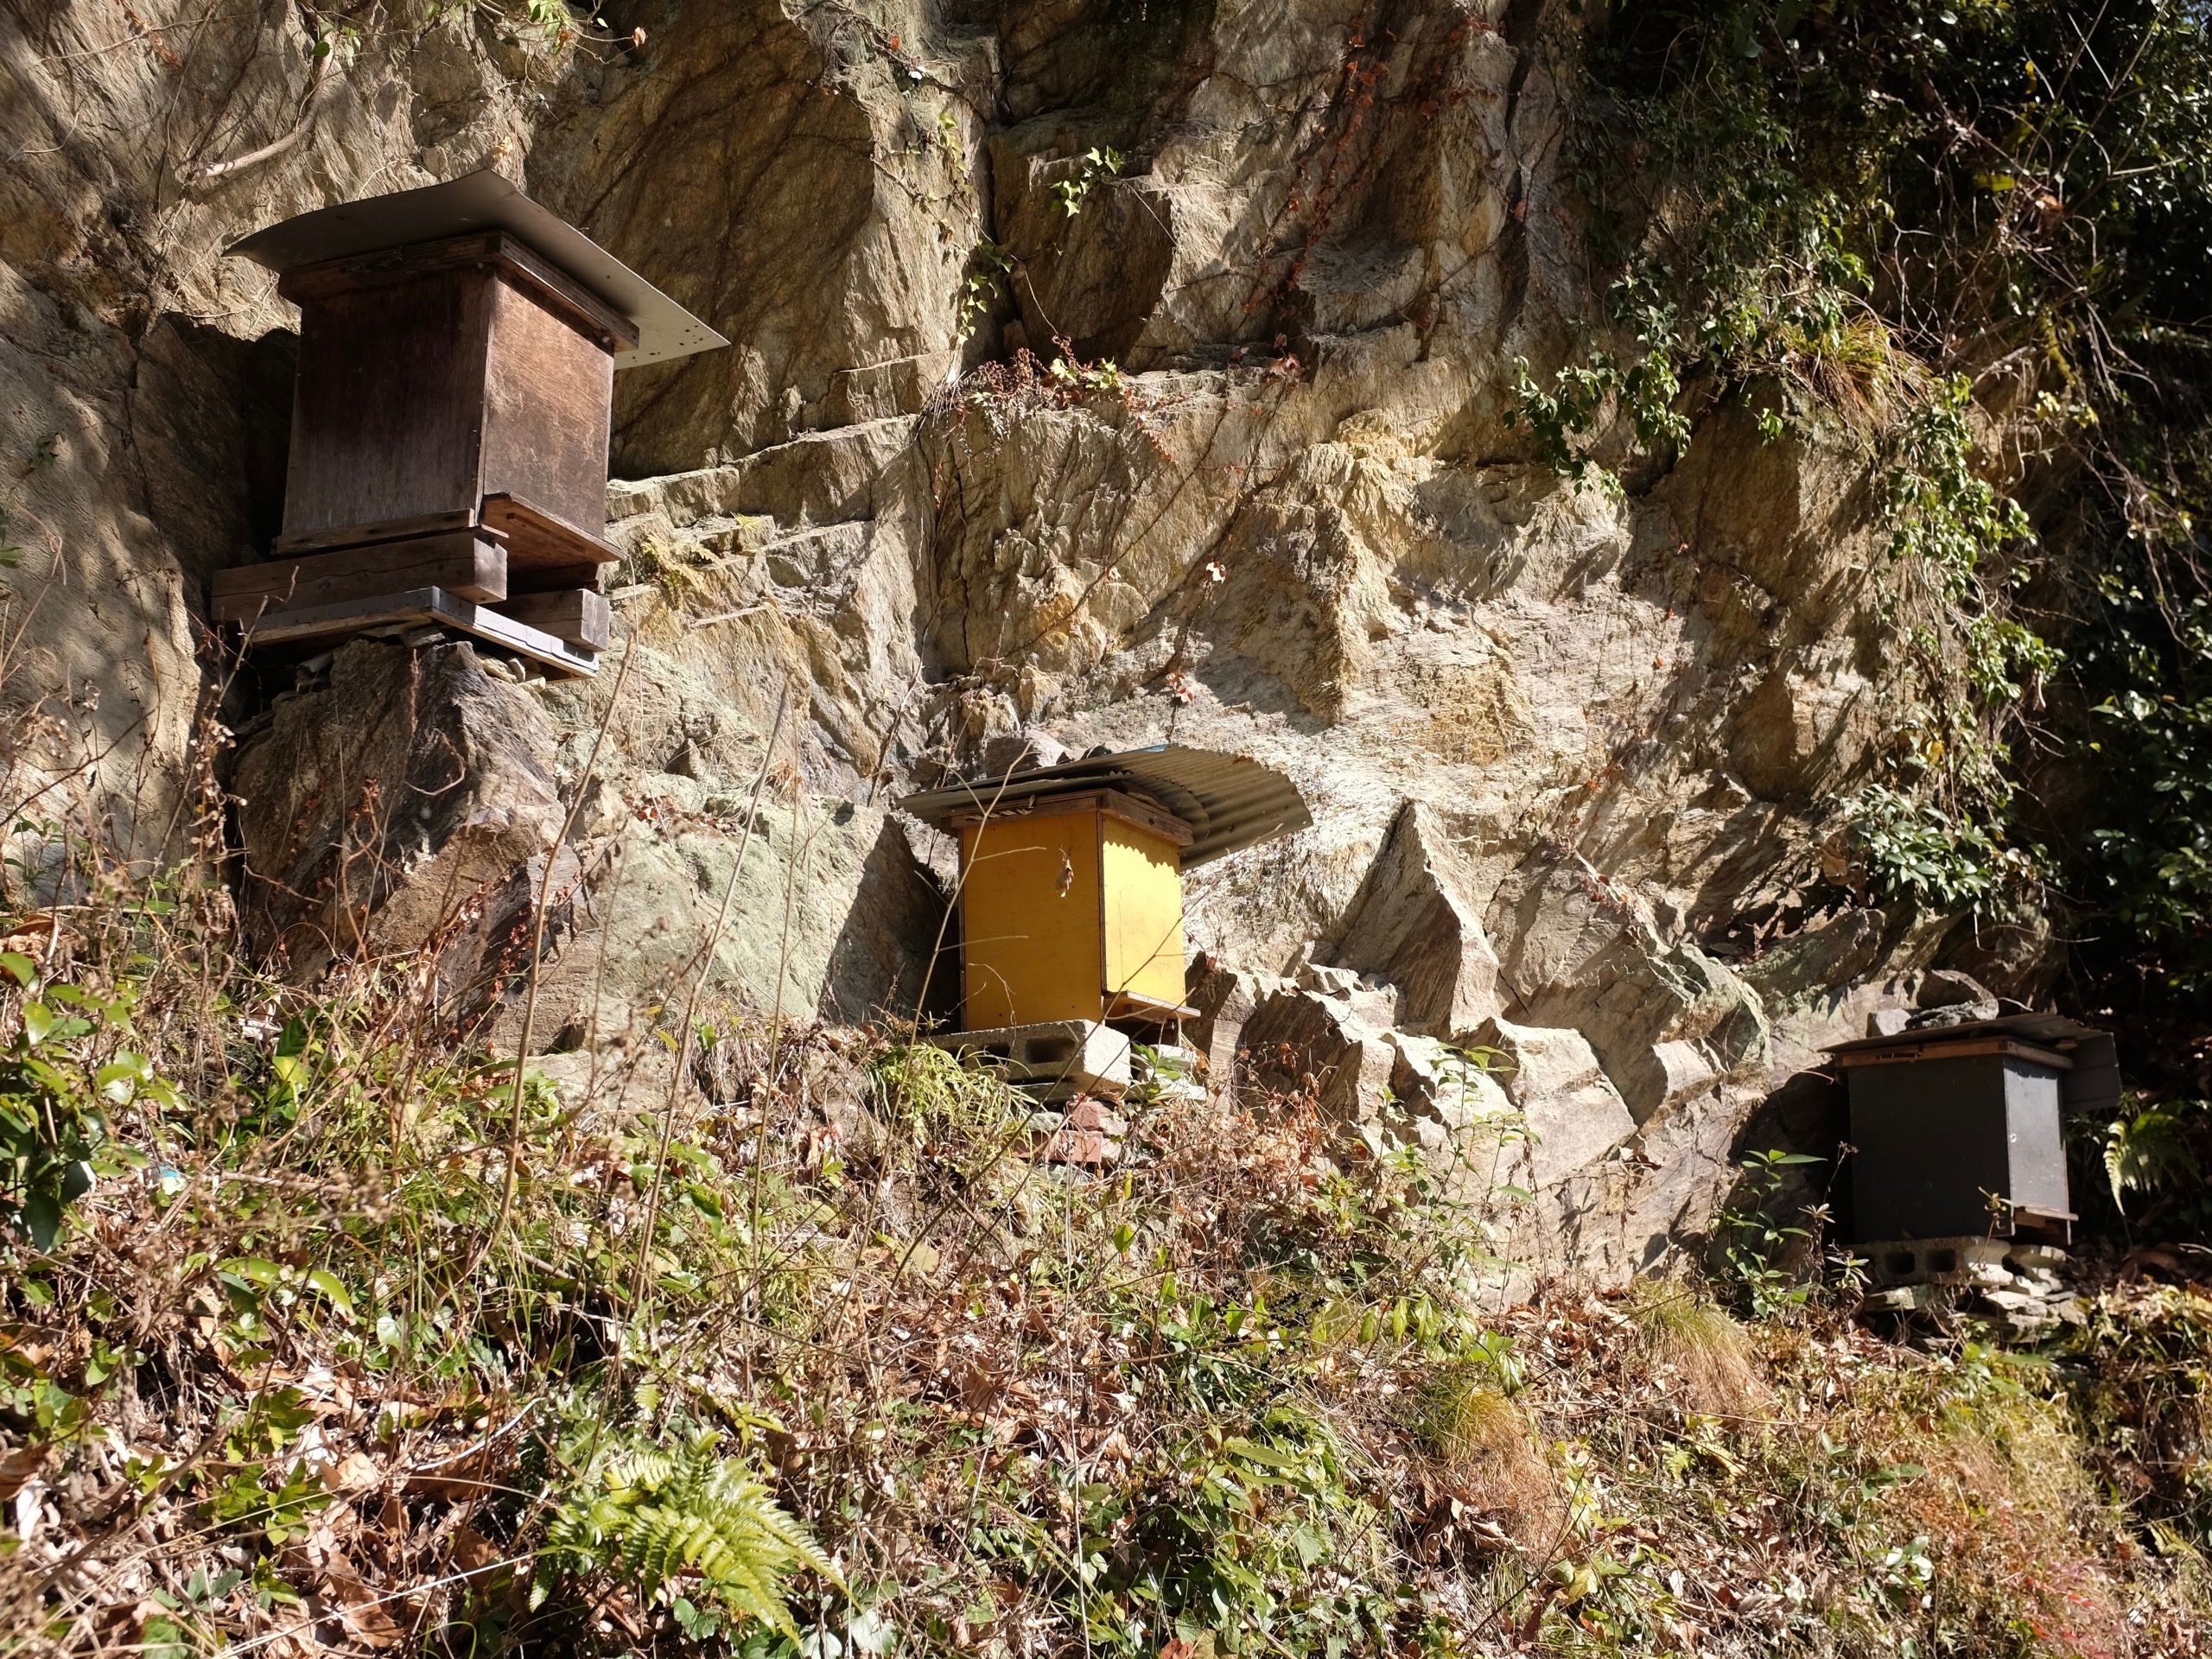 Three small square hives places on rocks on a hillside.